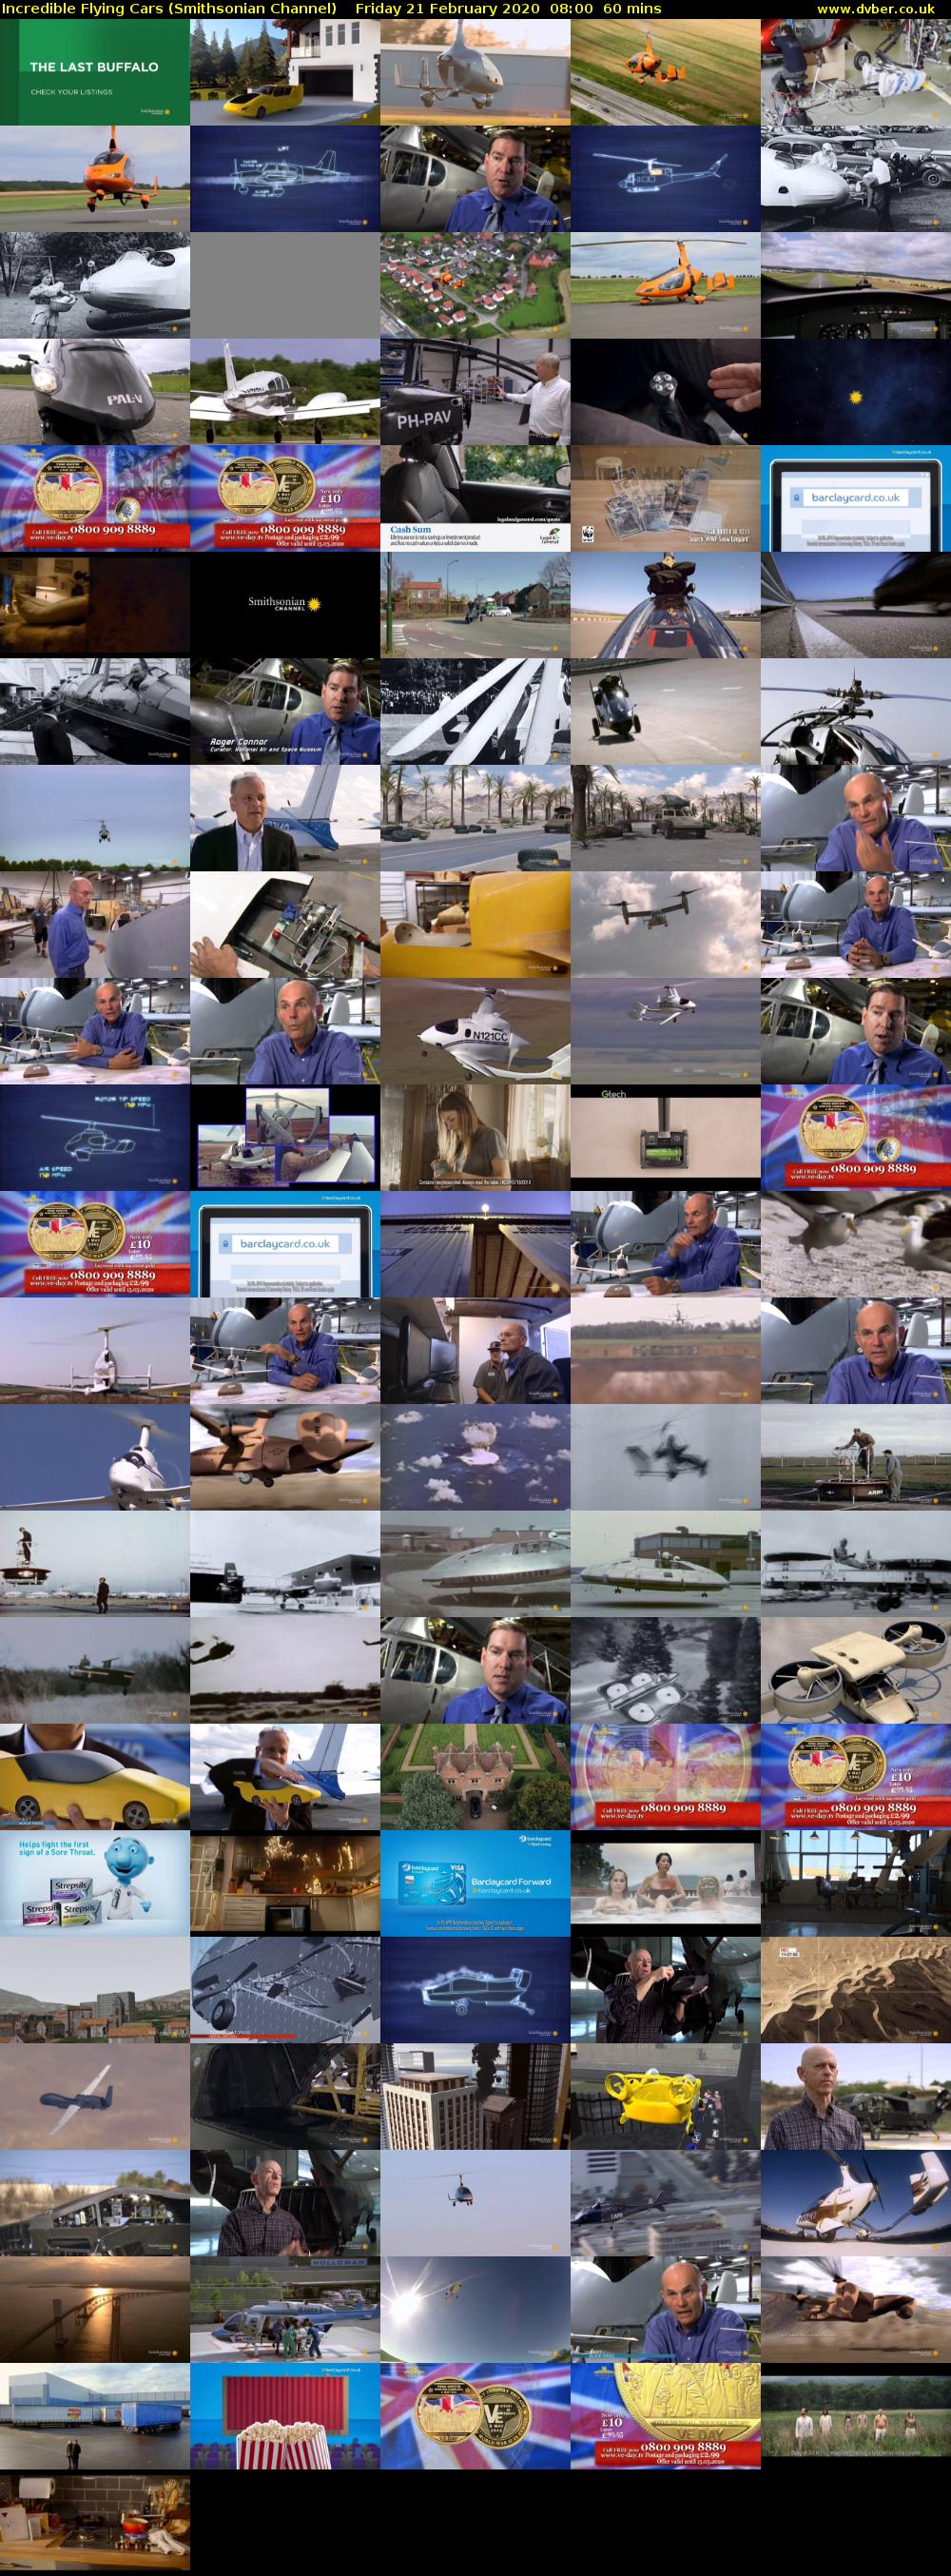 Incredible Flying Cars (Smithsonian Channel) Friday 21 February 2020 08:00 - 09:00